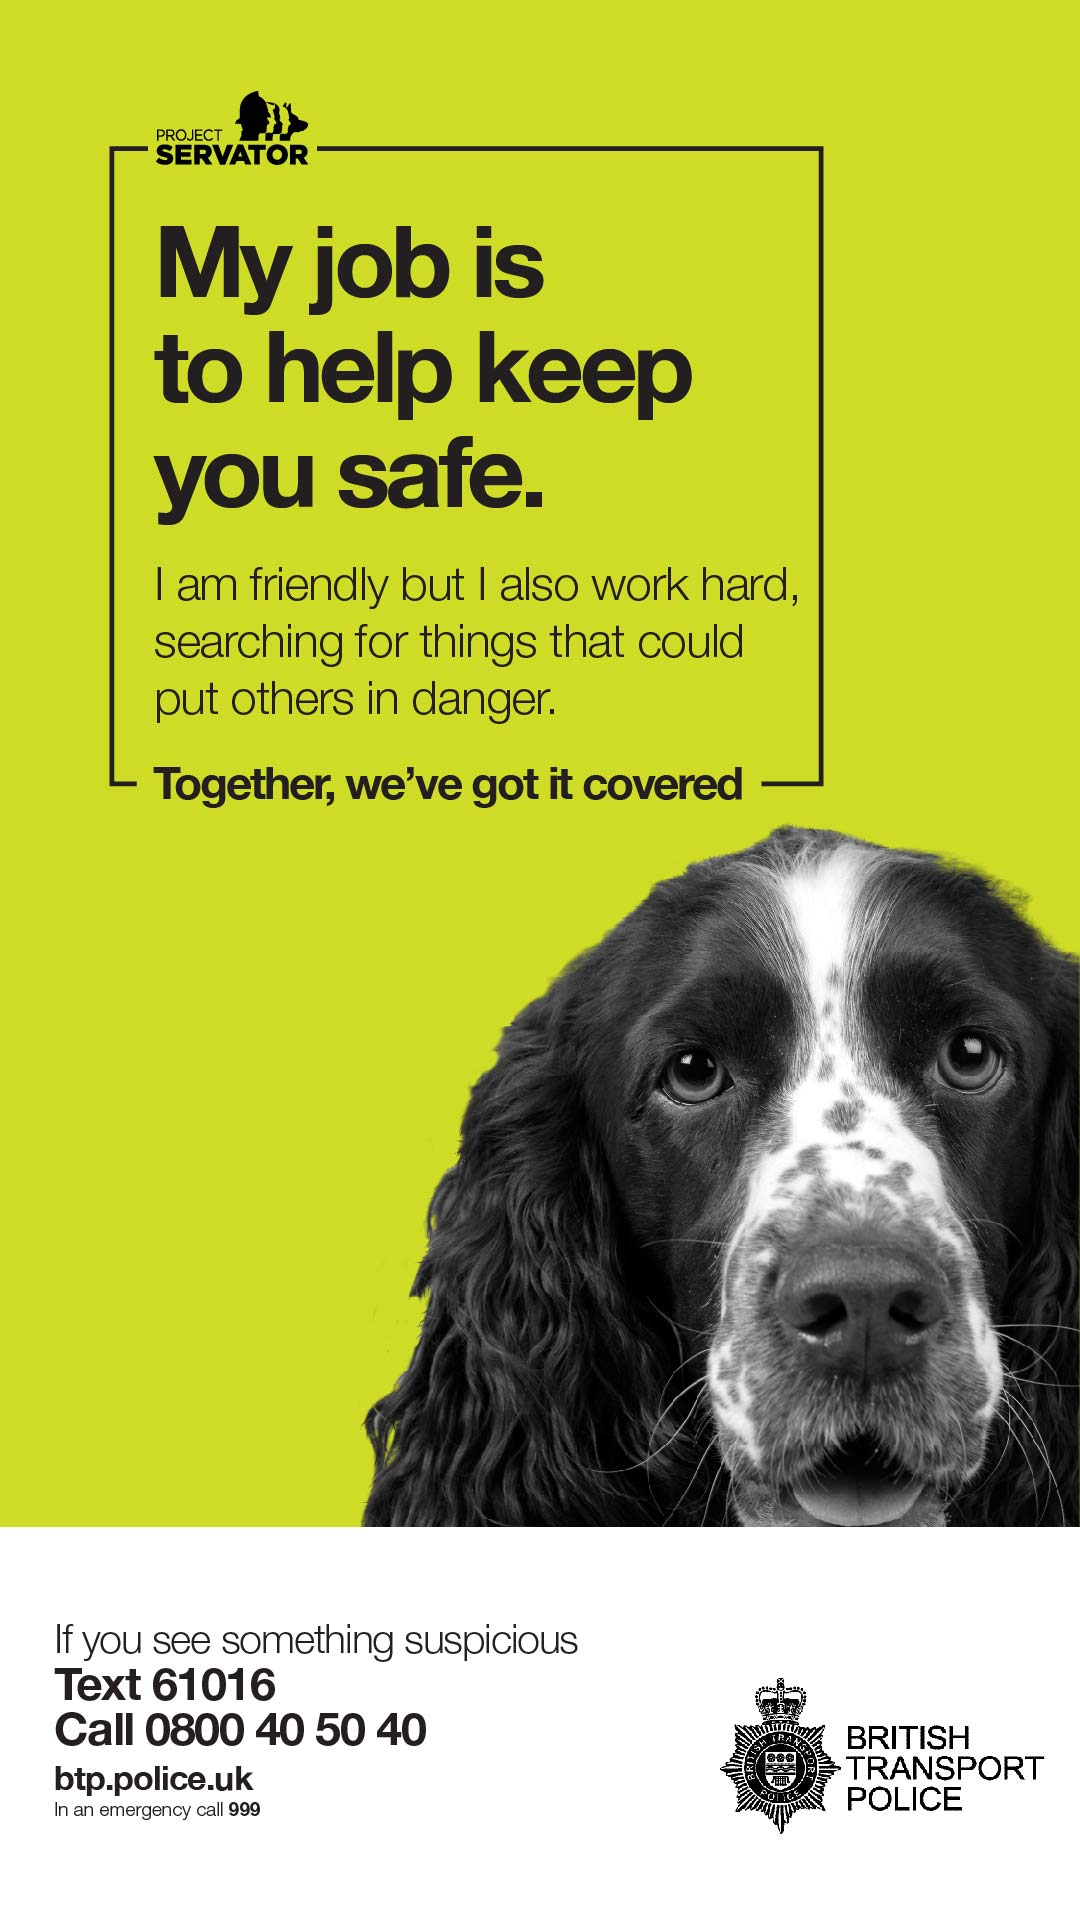 My Job is to keep you safe - British Transport Police and South Western Railway working together